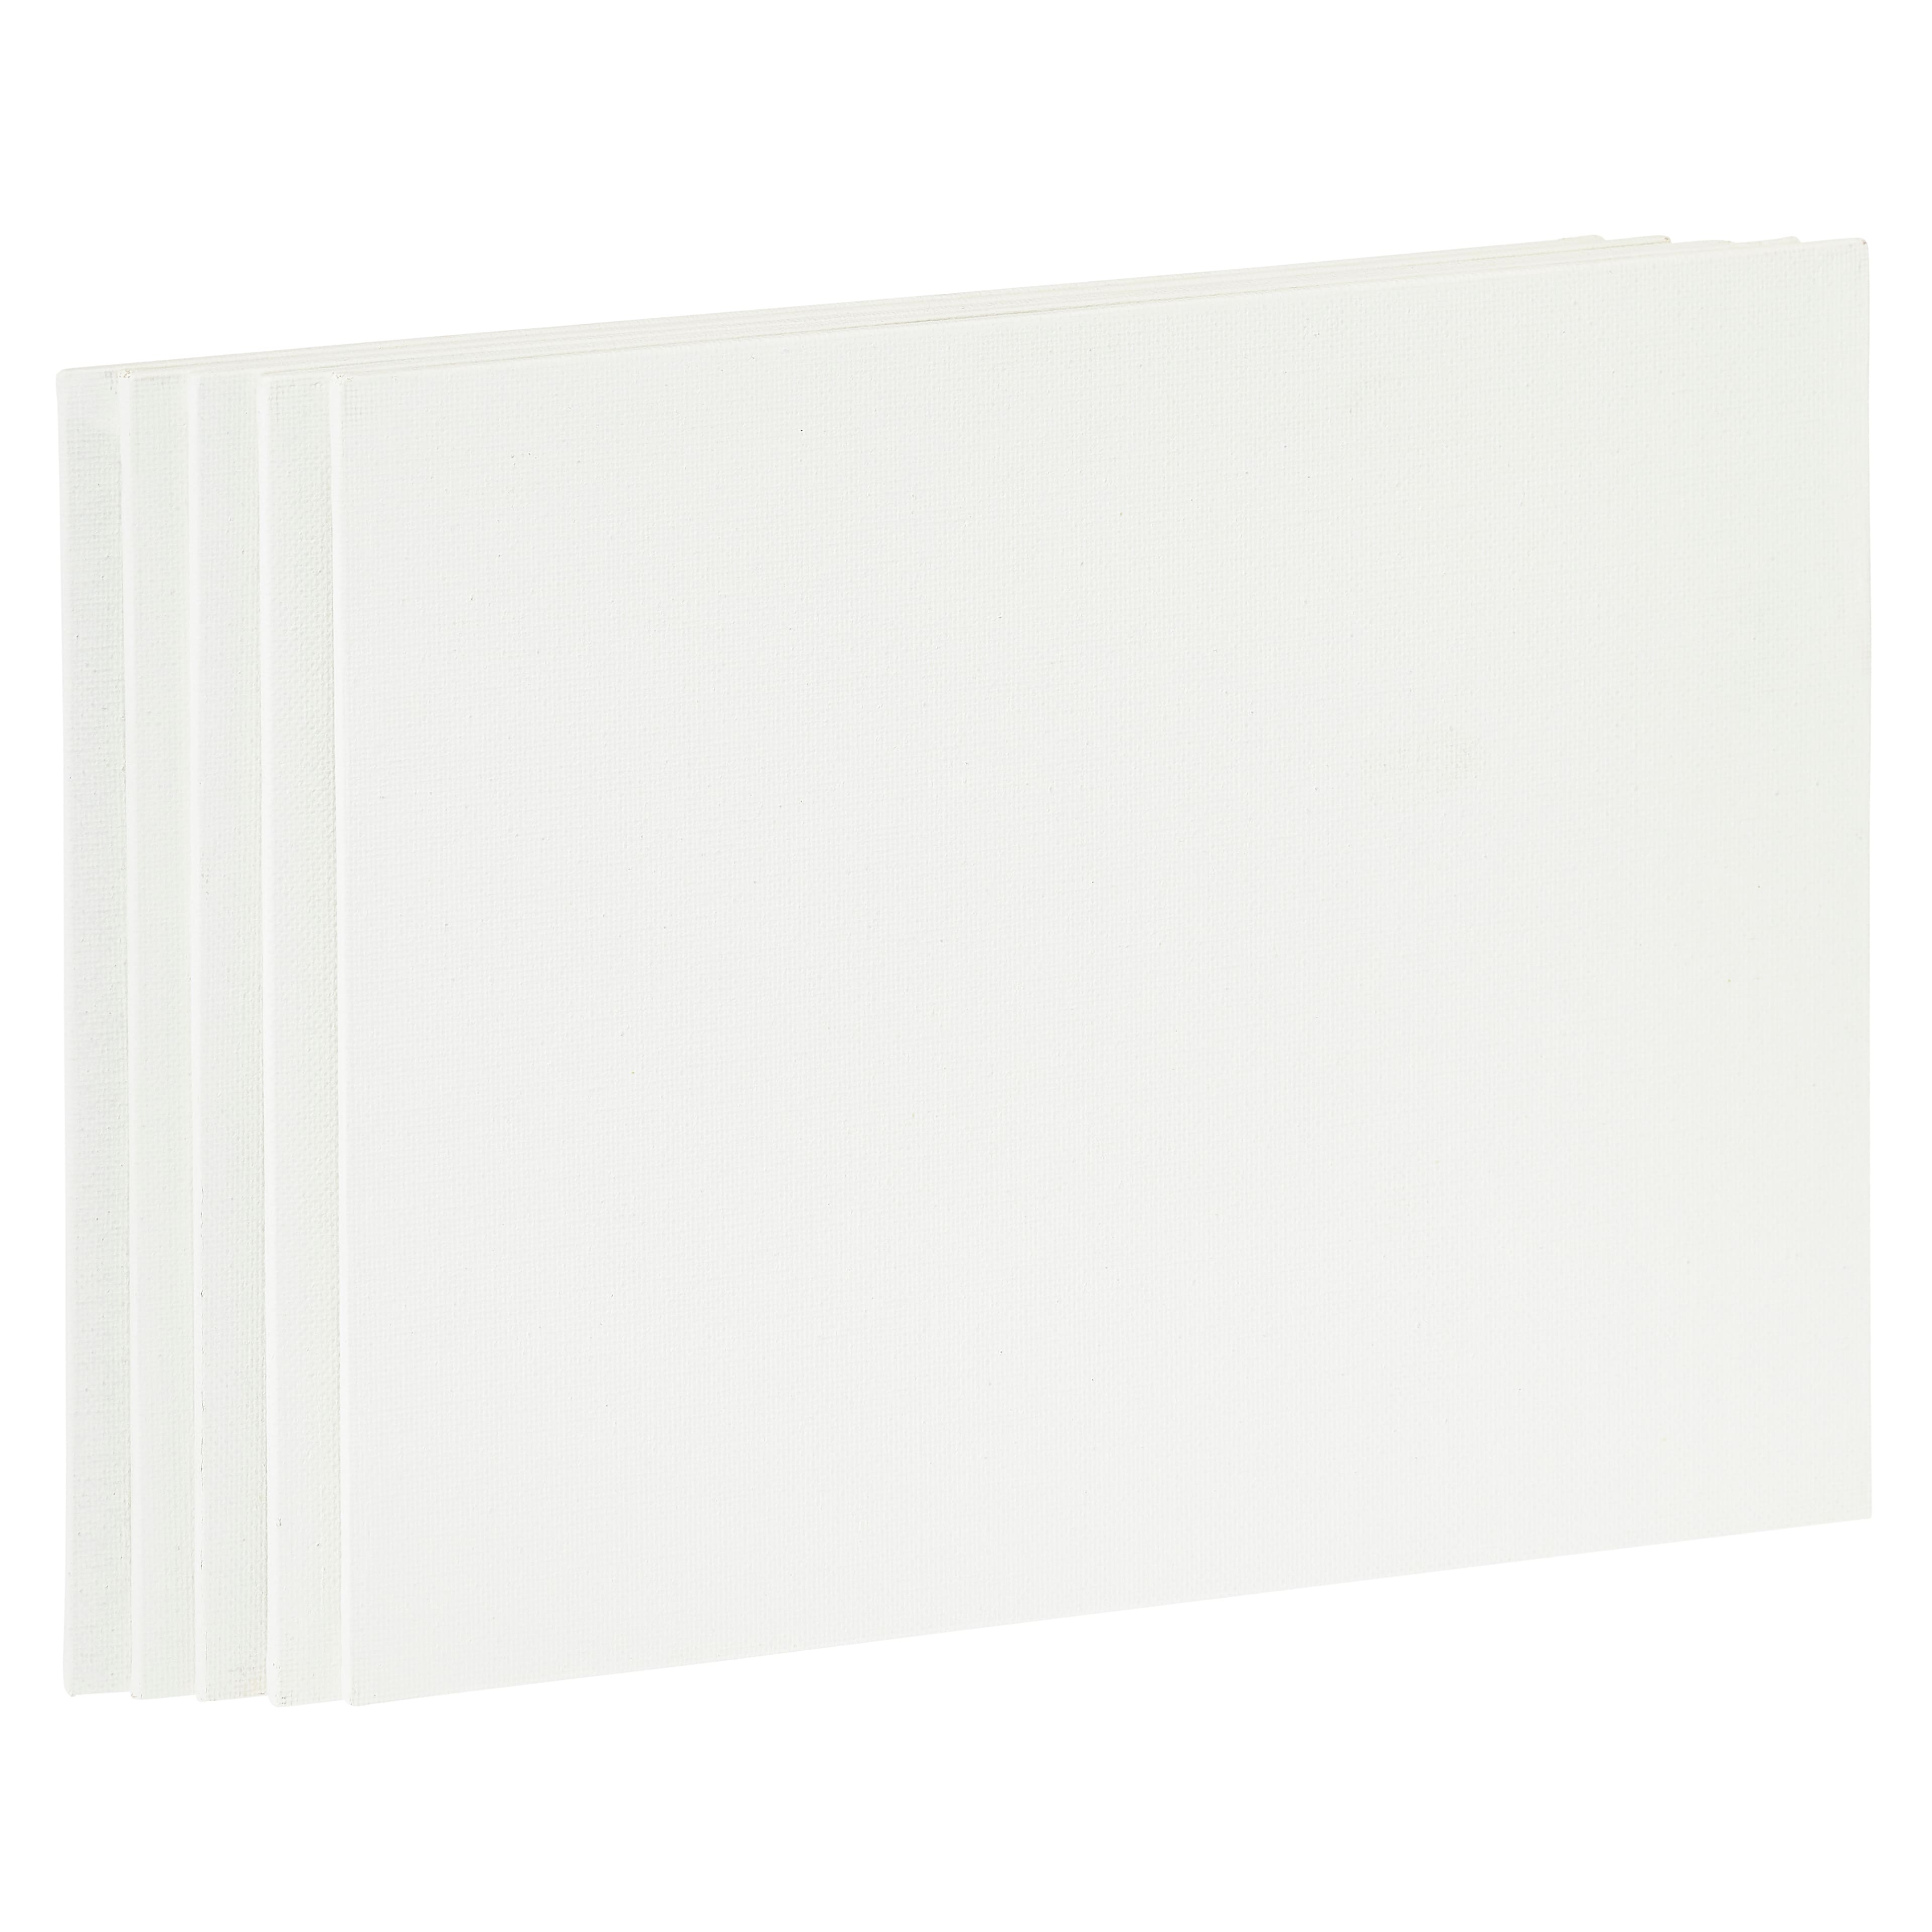  Canvas 11 x 14 Inch, Canvas Boards for Painting 32